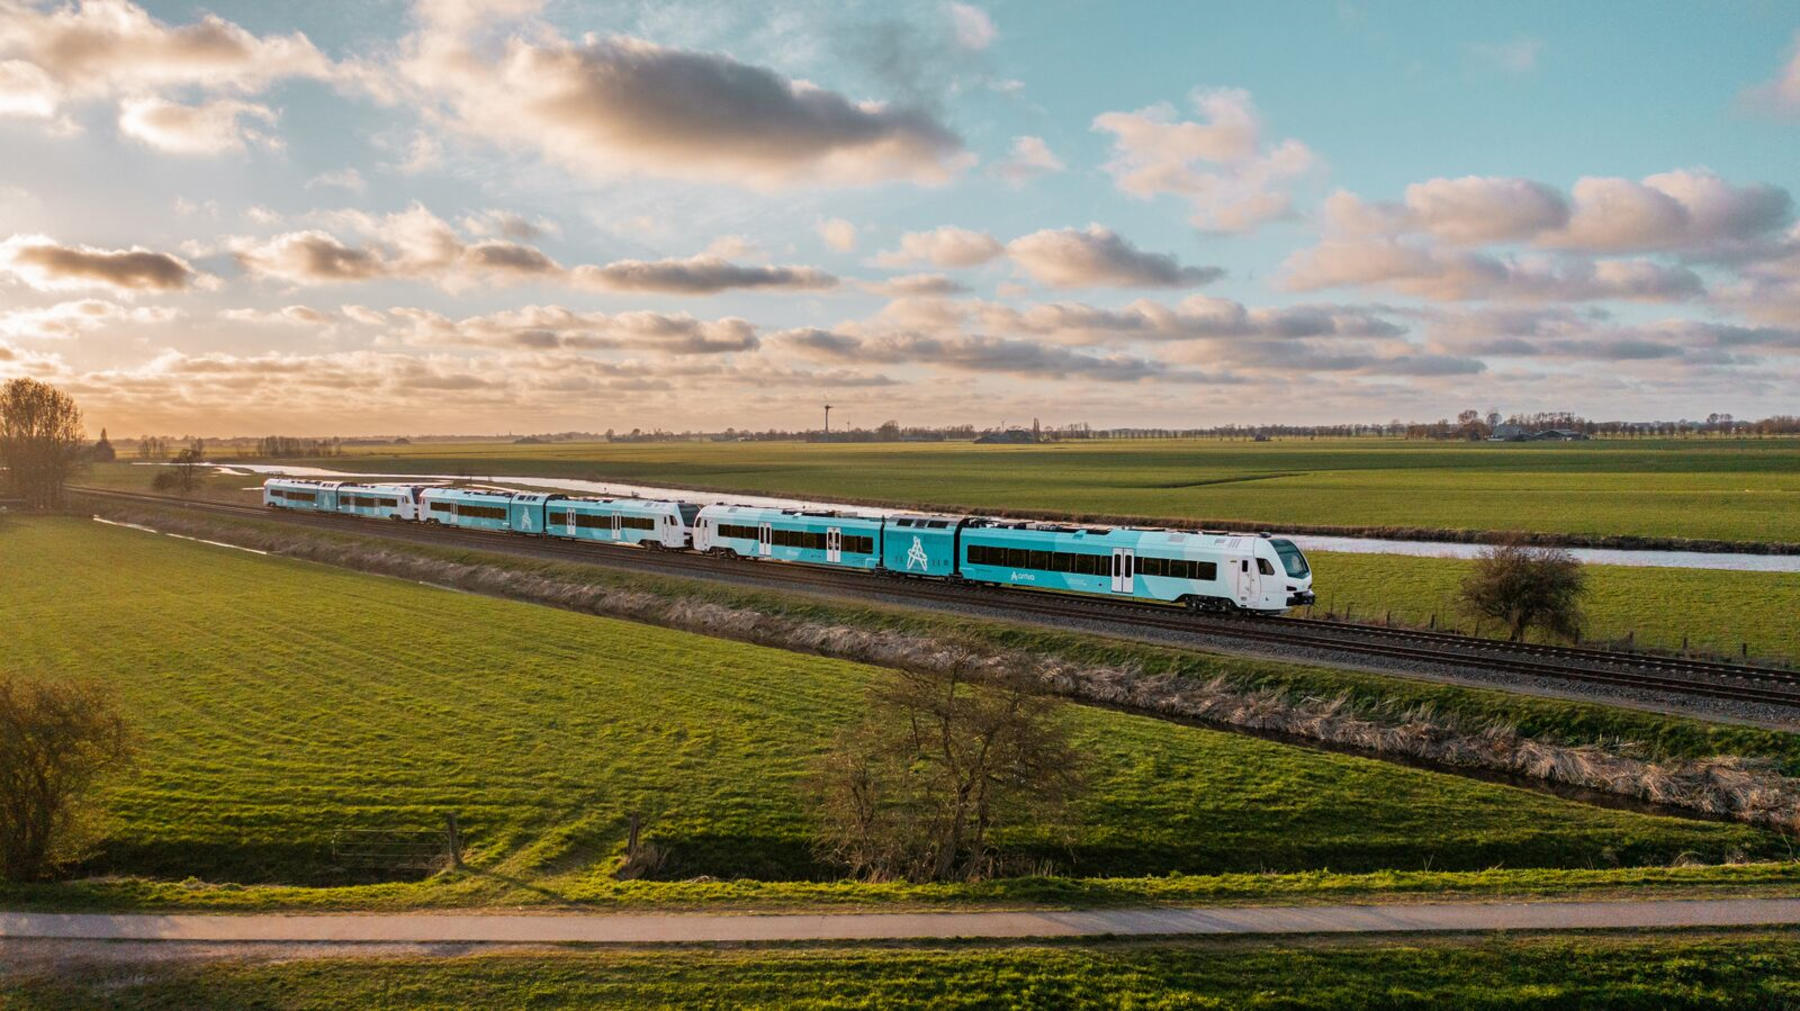 A Stadler WINK operated by Arriva